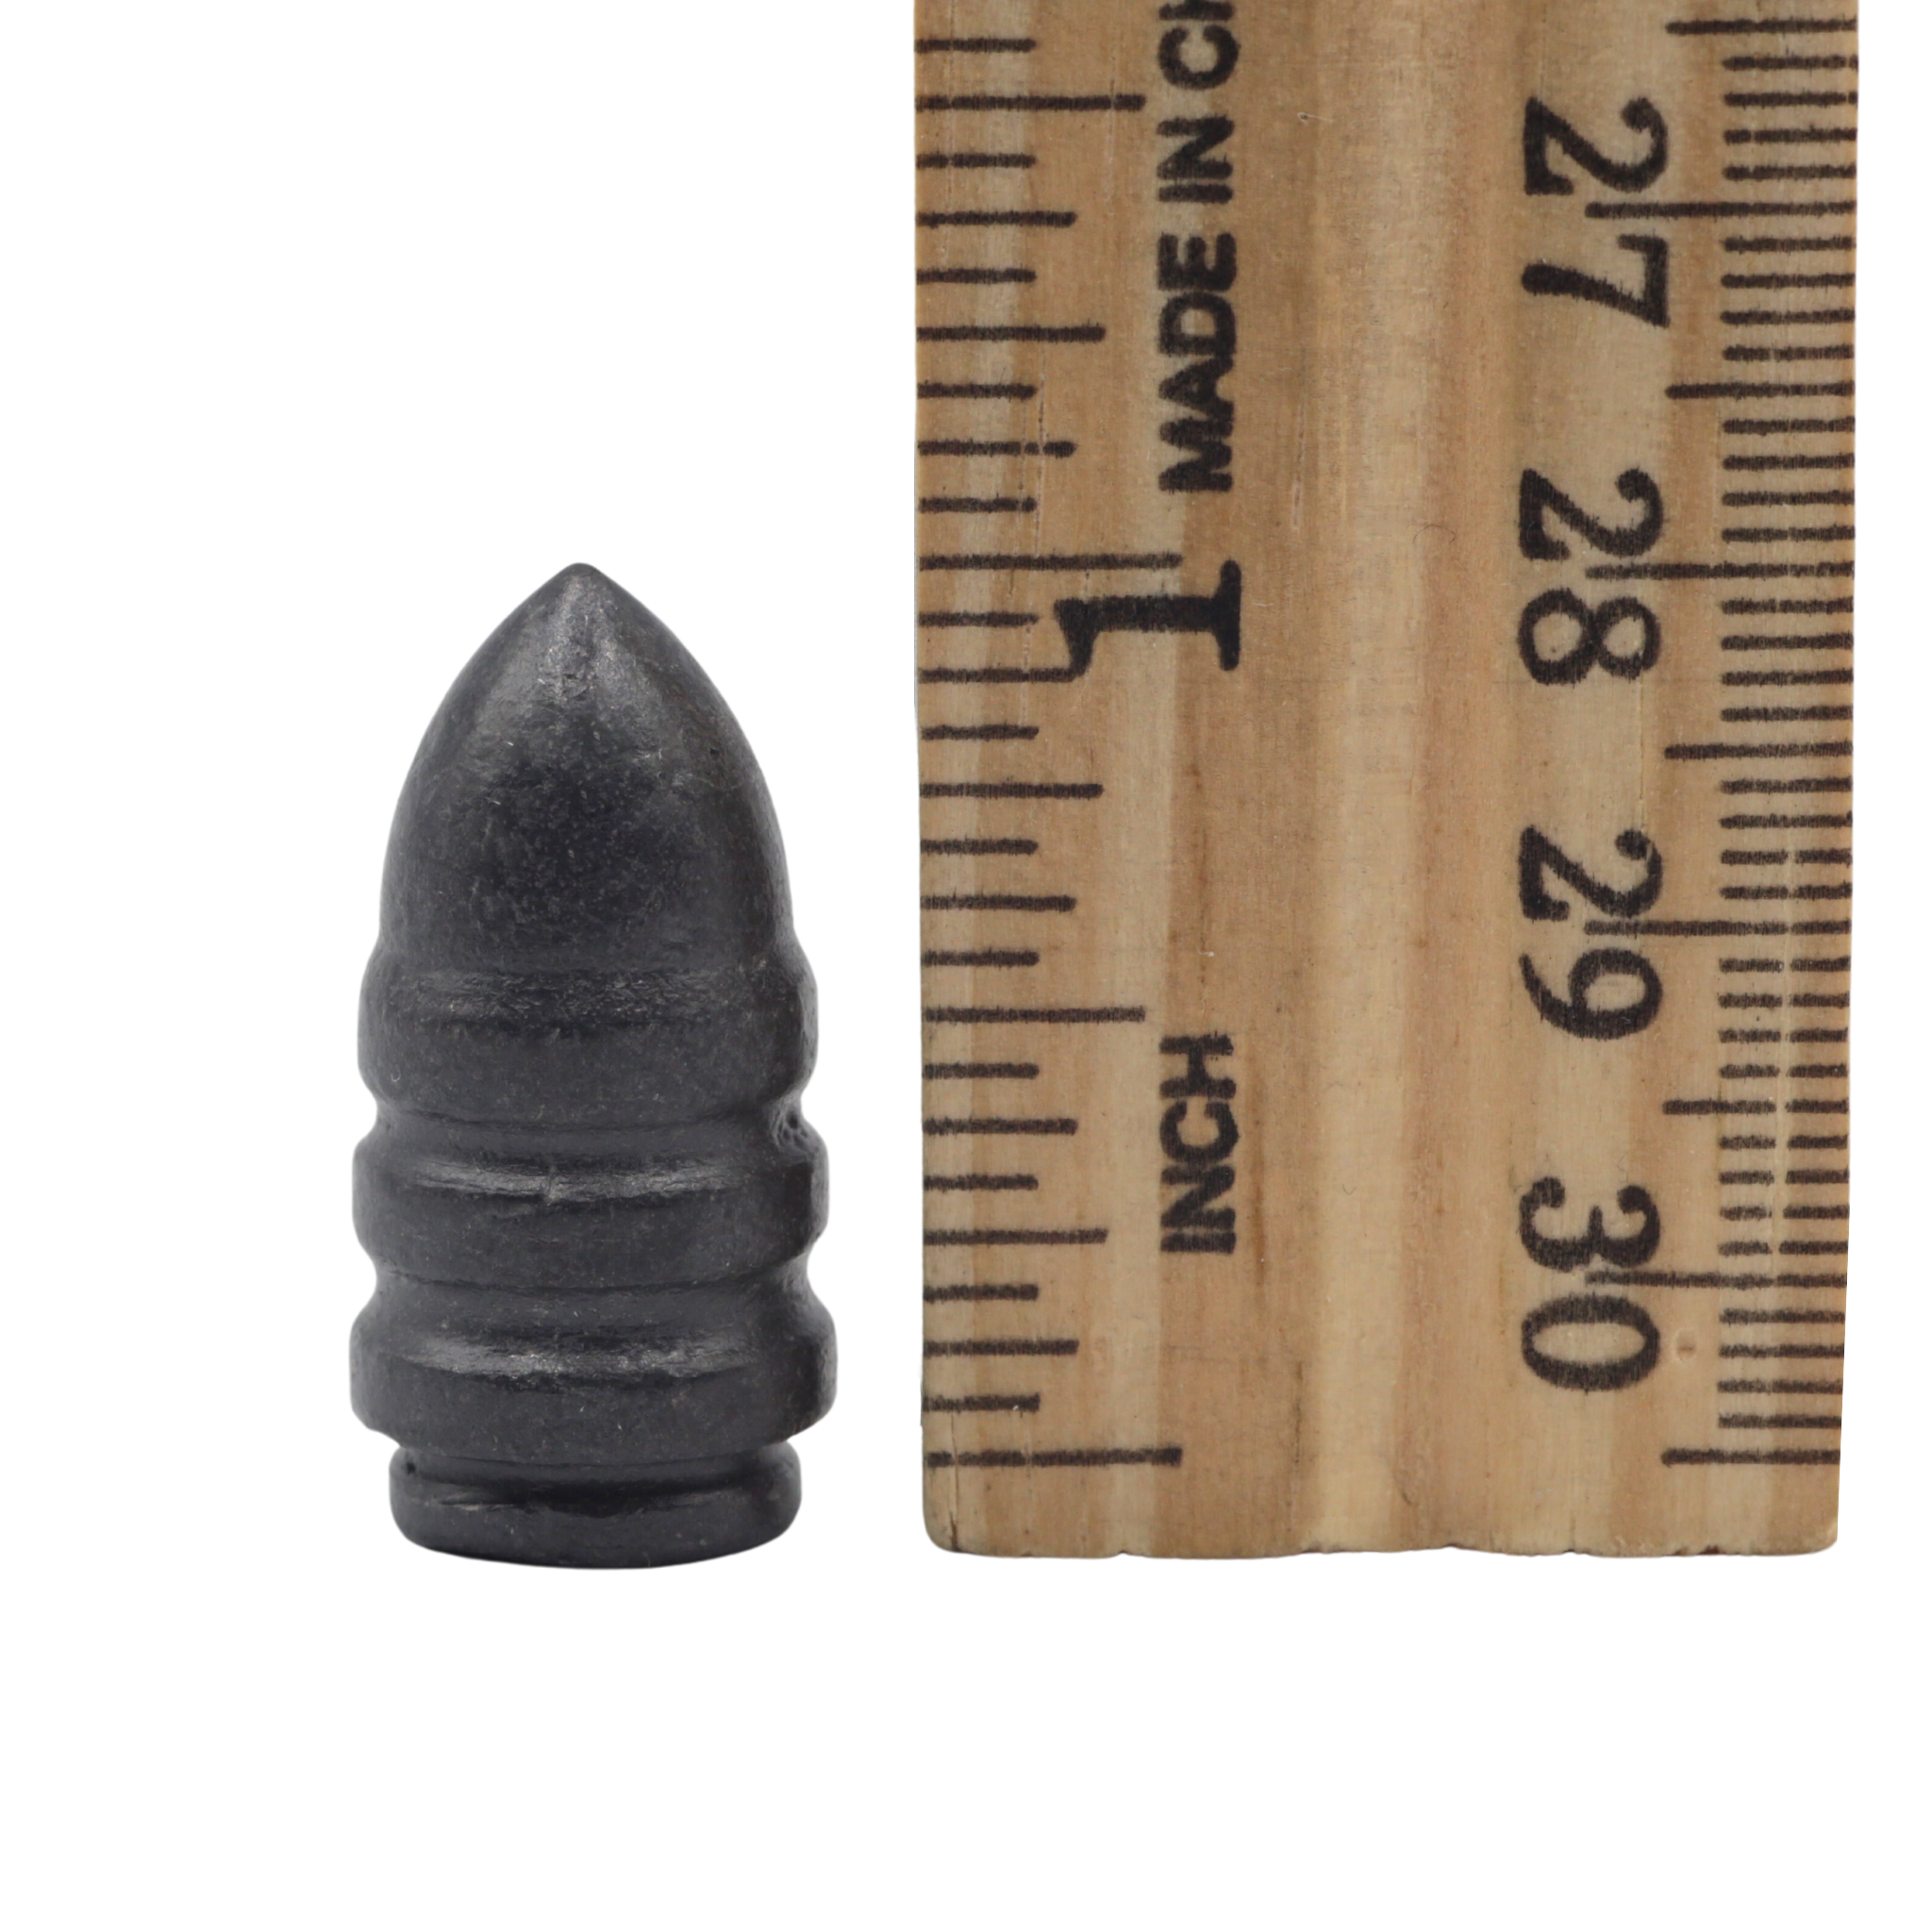 54 cal.  Sharps Flees Ring-Tail 488gr. Lead Bullet, 20 Rounds